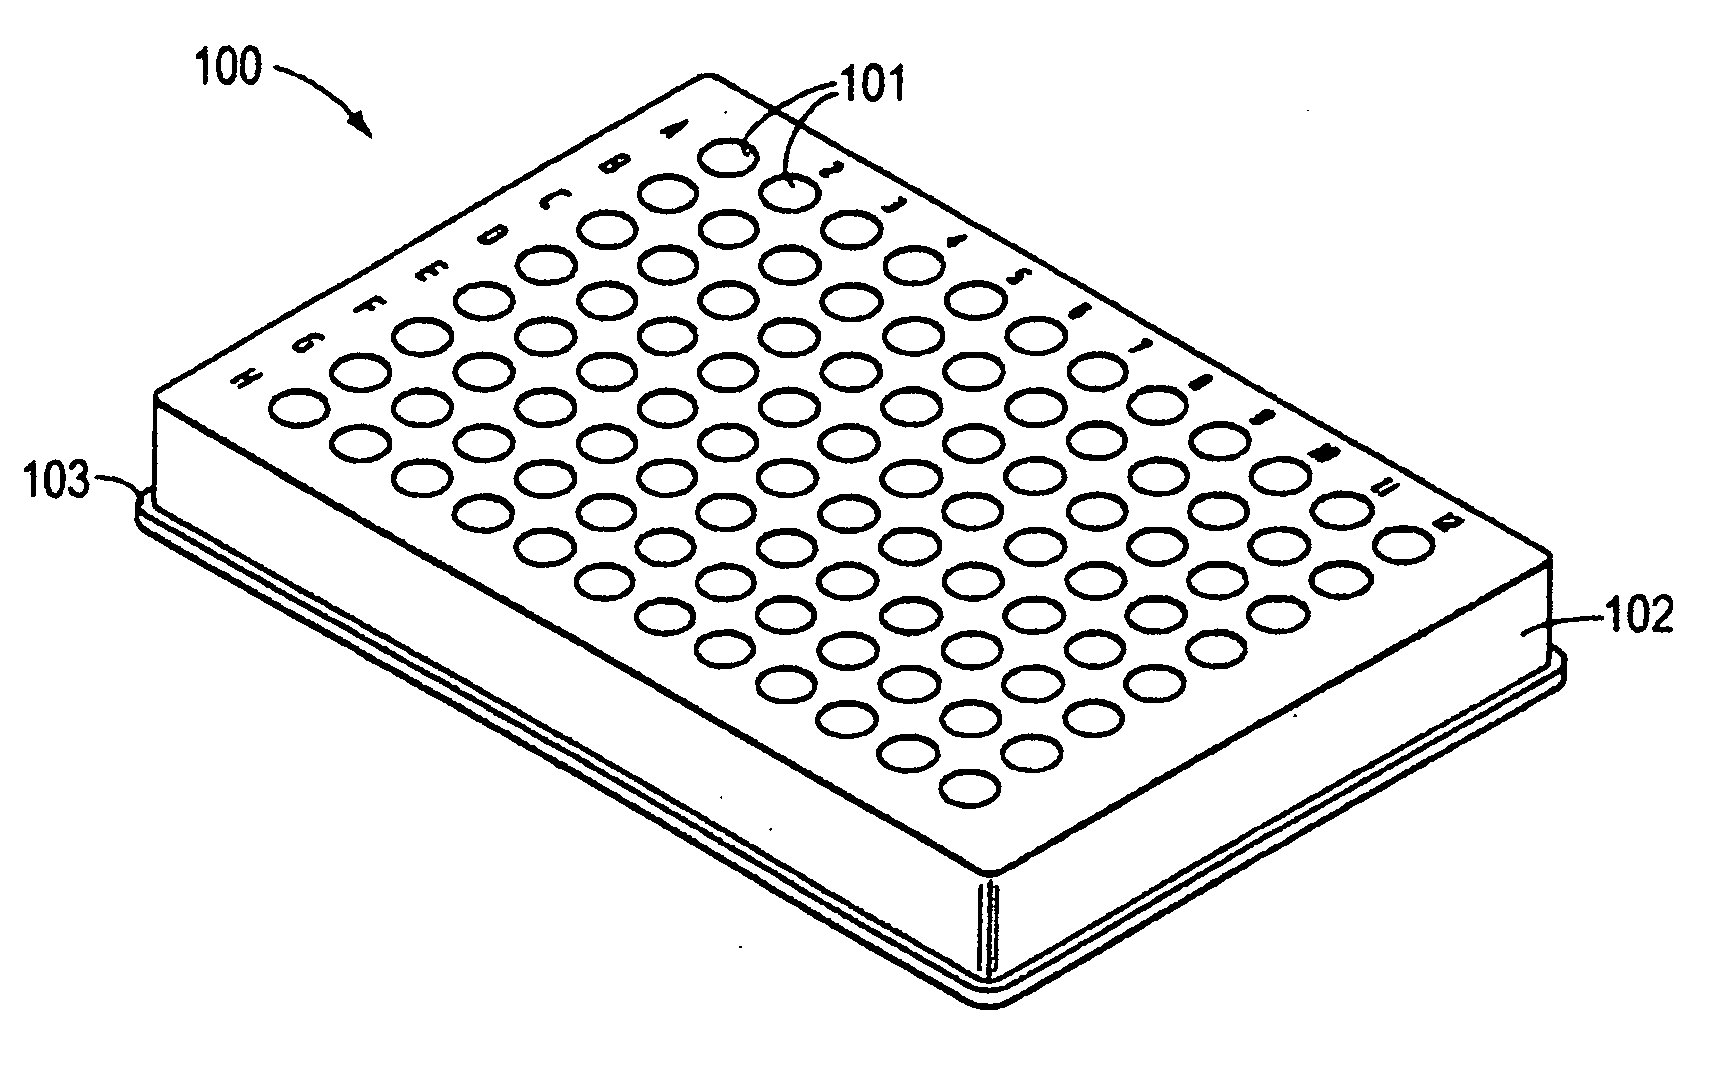 Microplate and methods of using the same